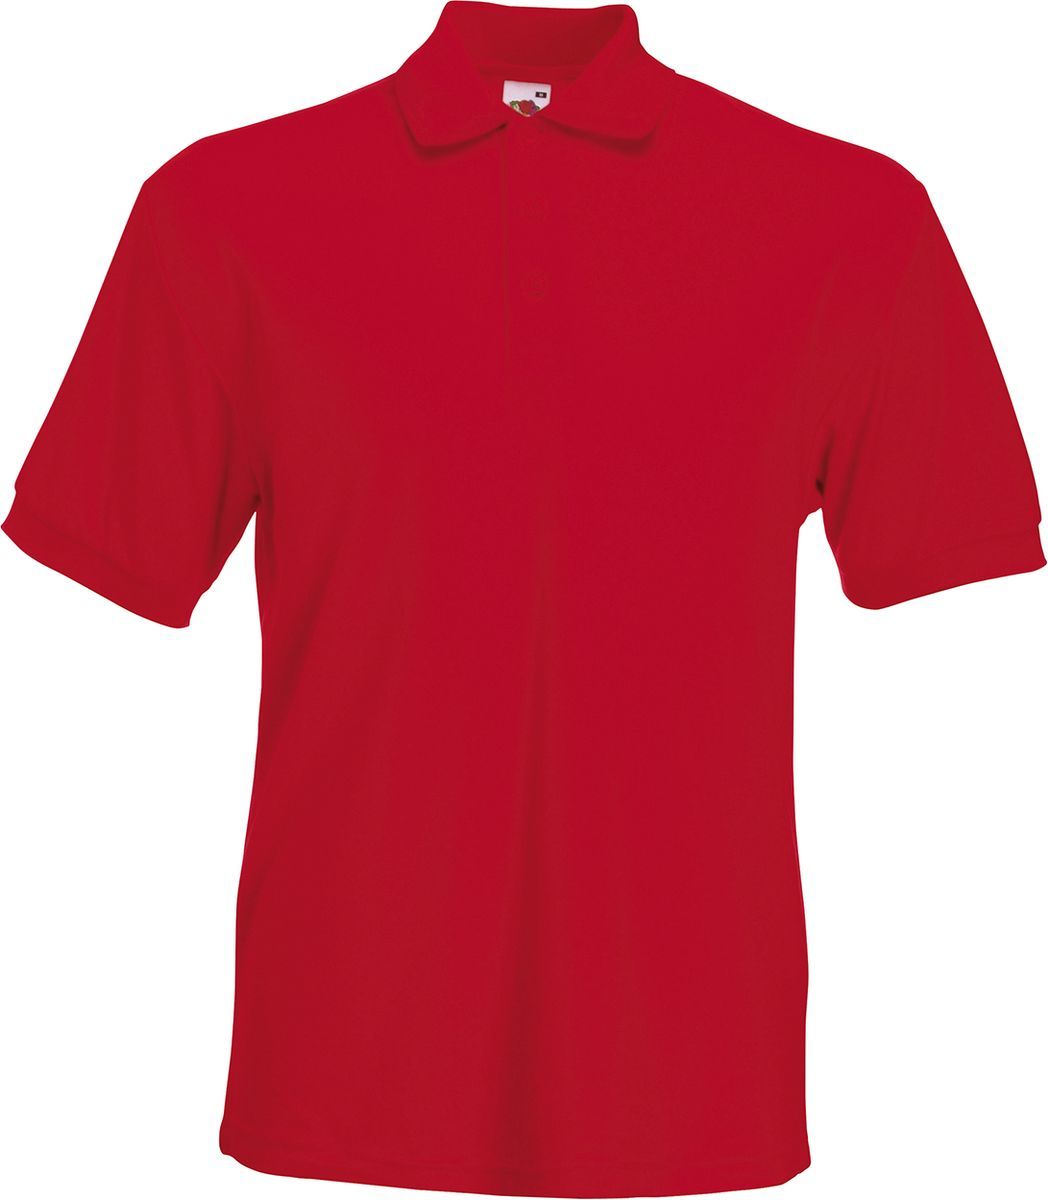 Heavyweight Polo Fruit of the Loom 63-204-0 Red